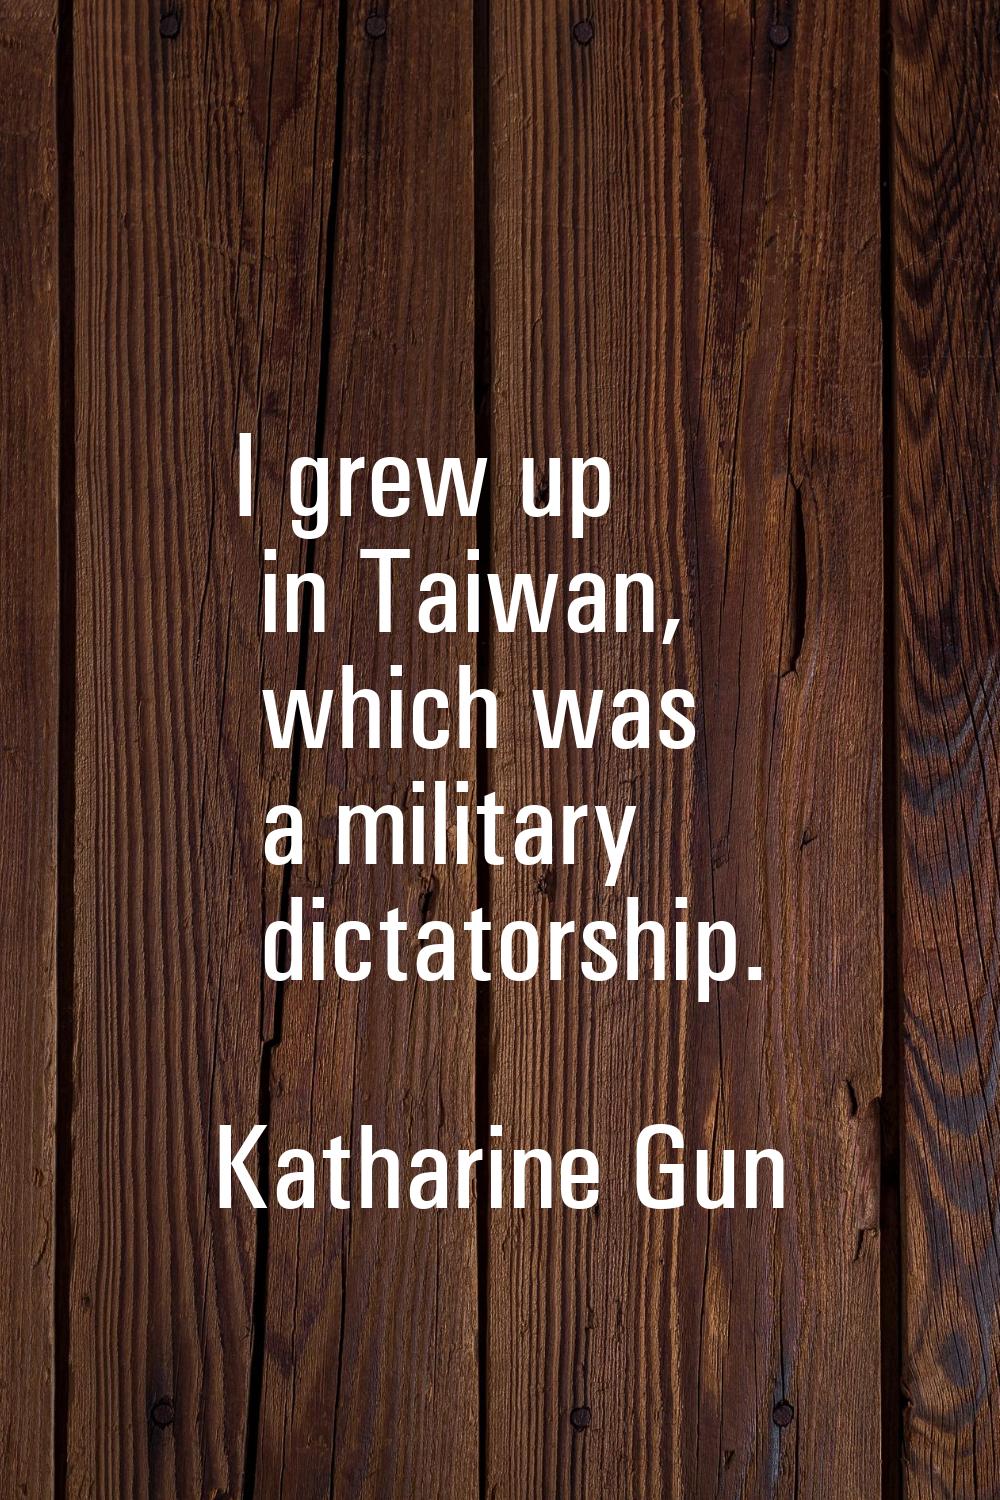 I grew up in Taiwan, which was a military dictatorship.